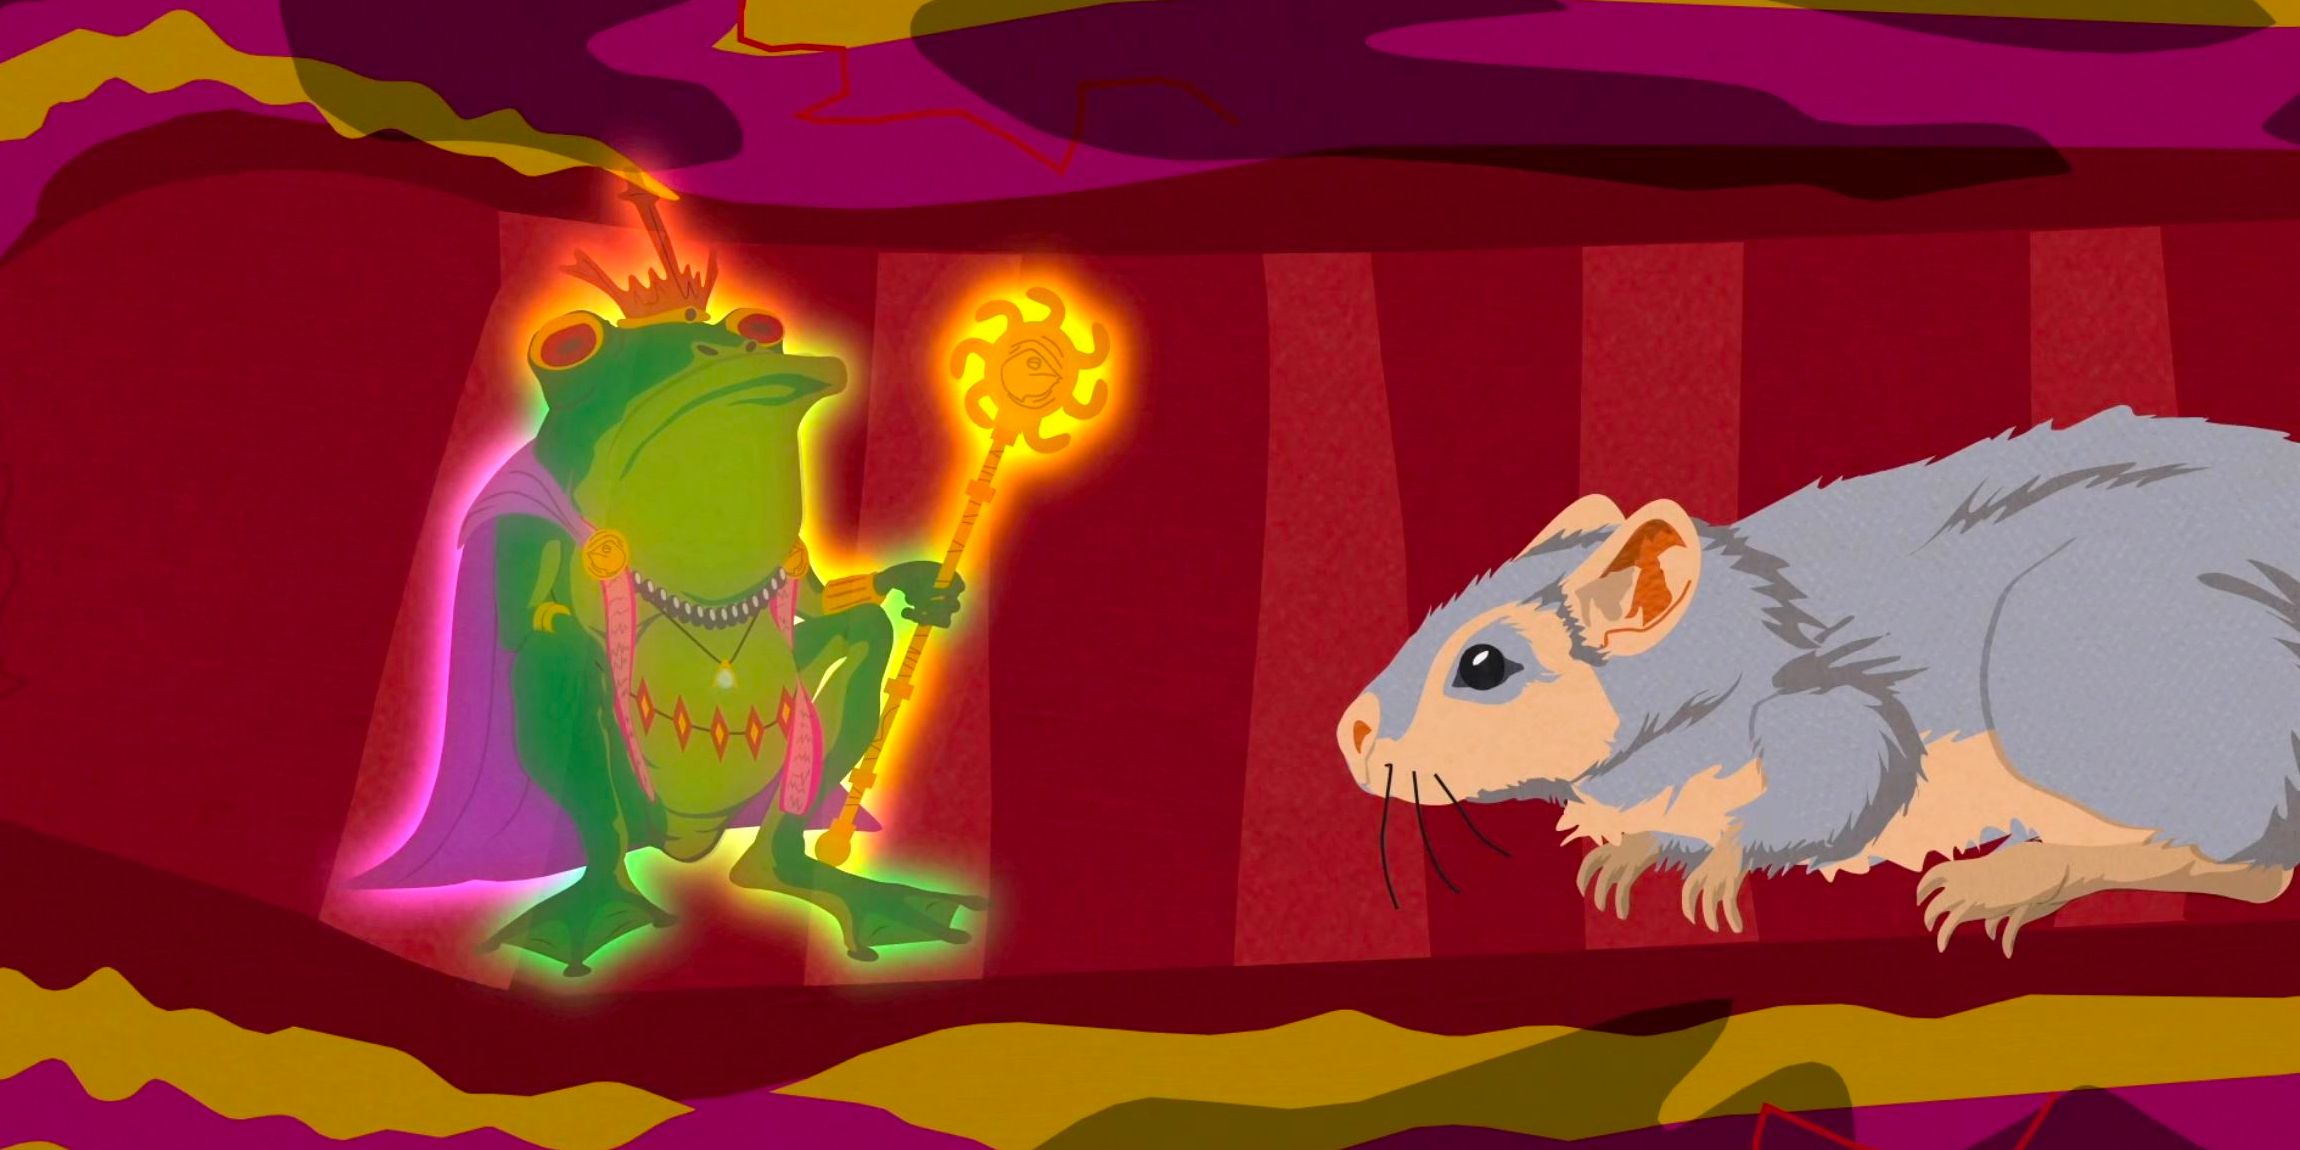 A gerbil is confronted by a frog spirit as he crawls through a man's intestine.